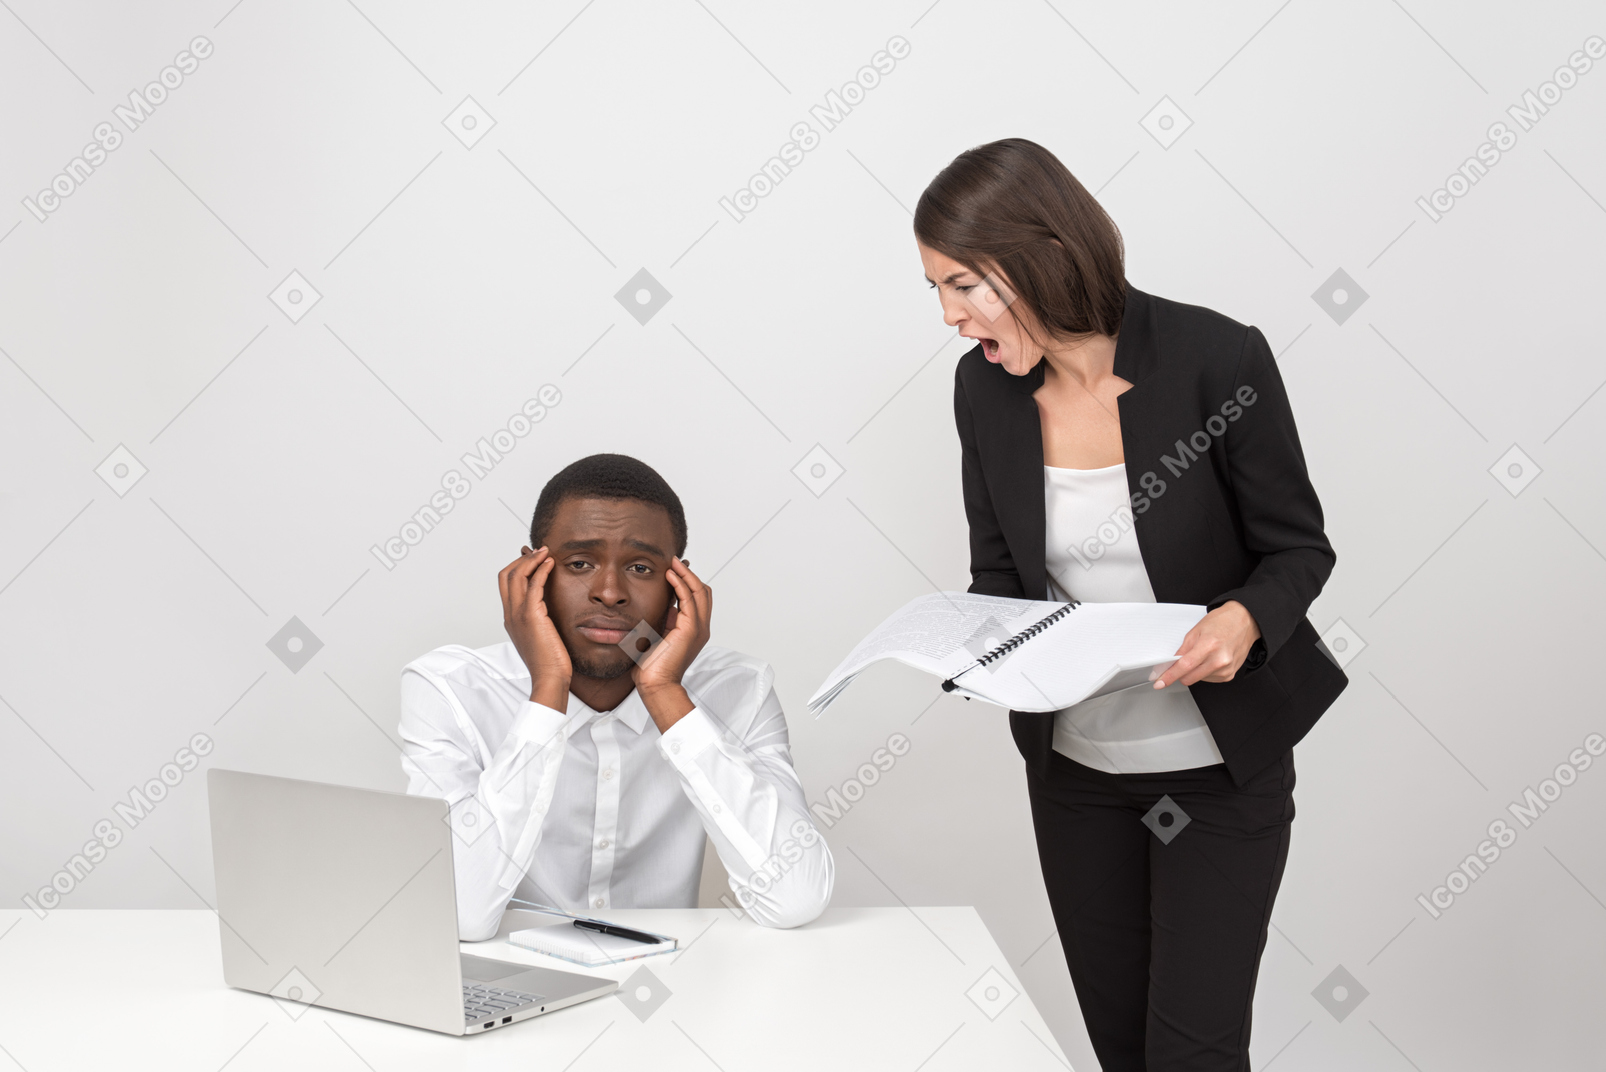 Angry female boss shouting at her upset employee